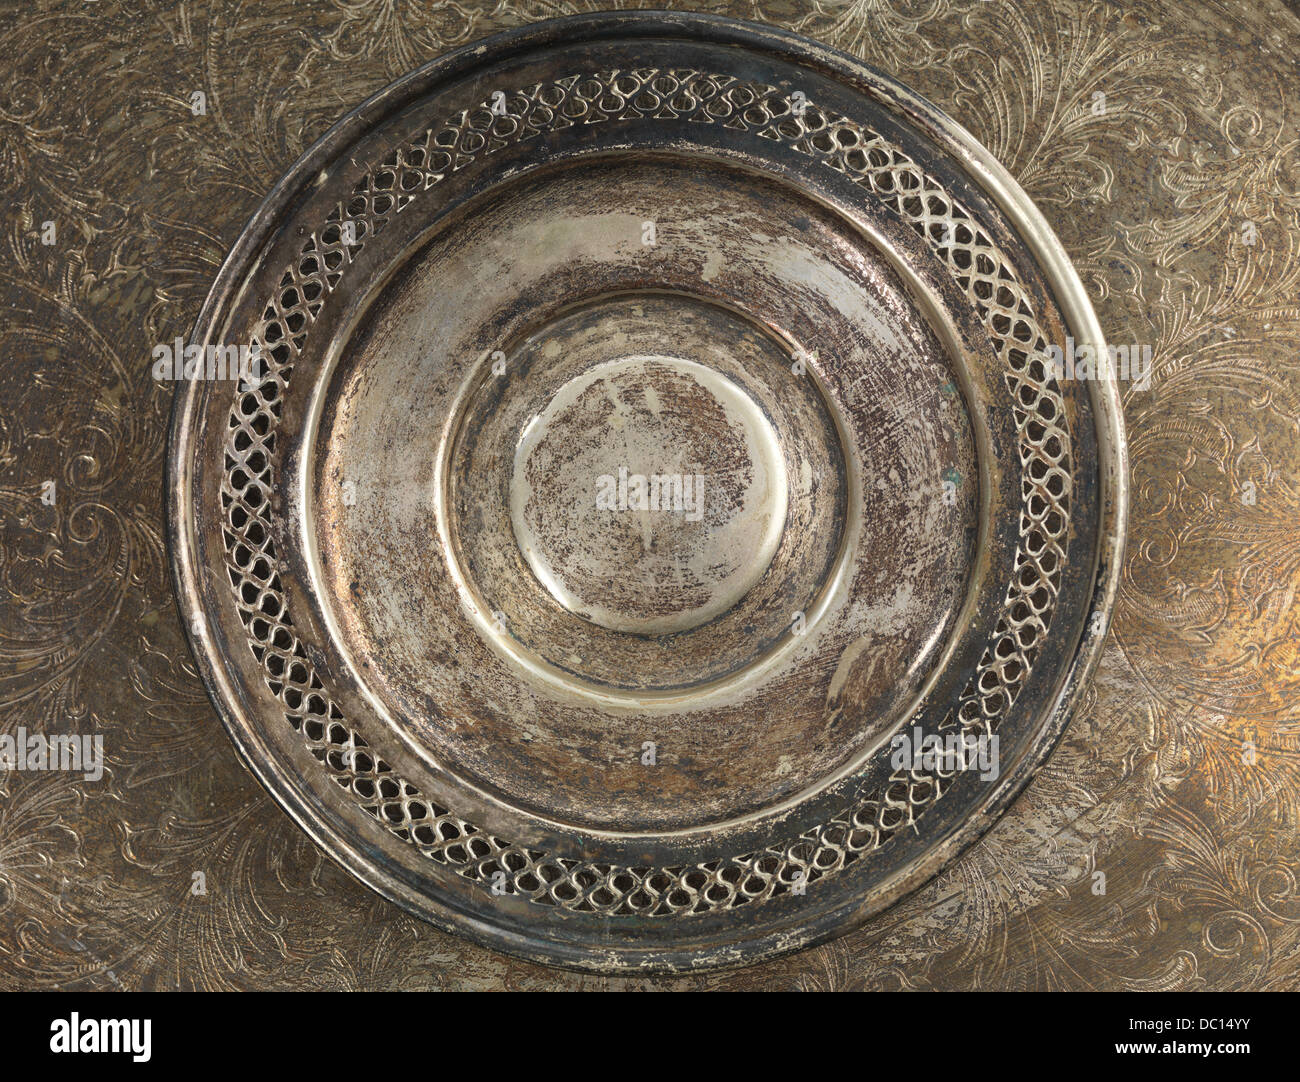 Round rustic silverware plate on metal background Stock Photo